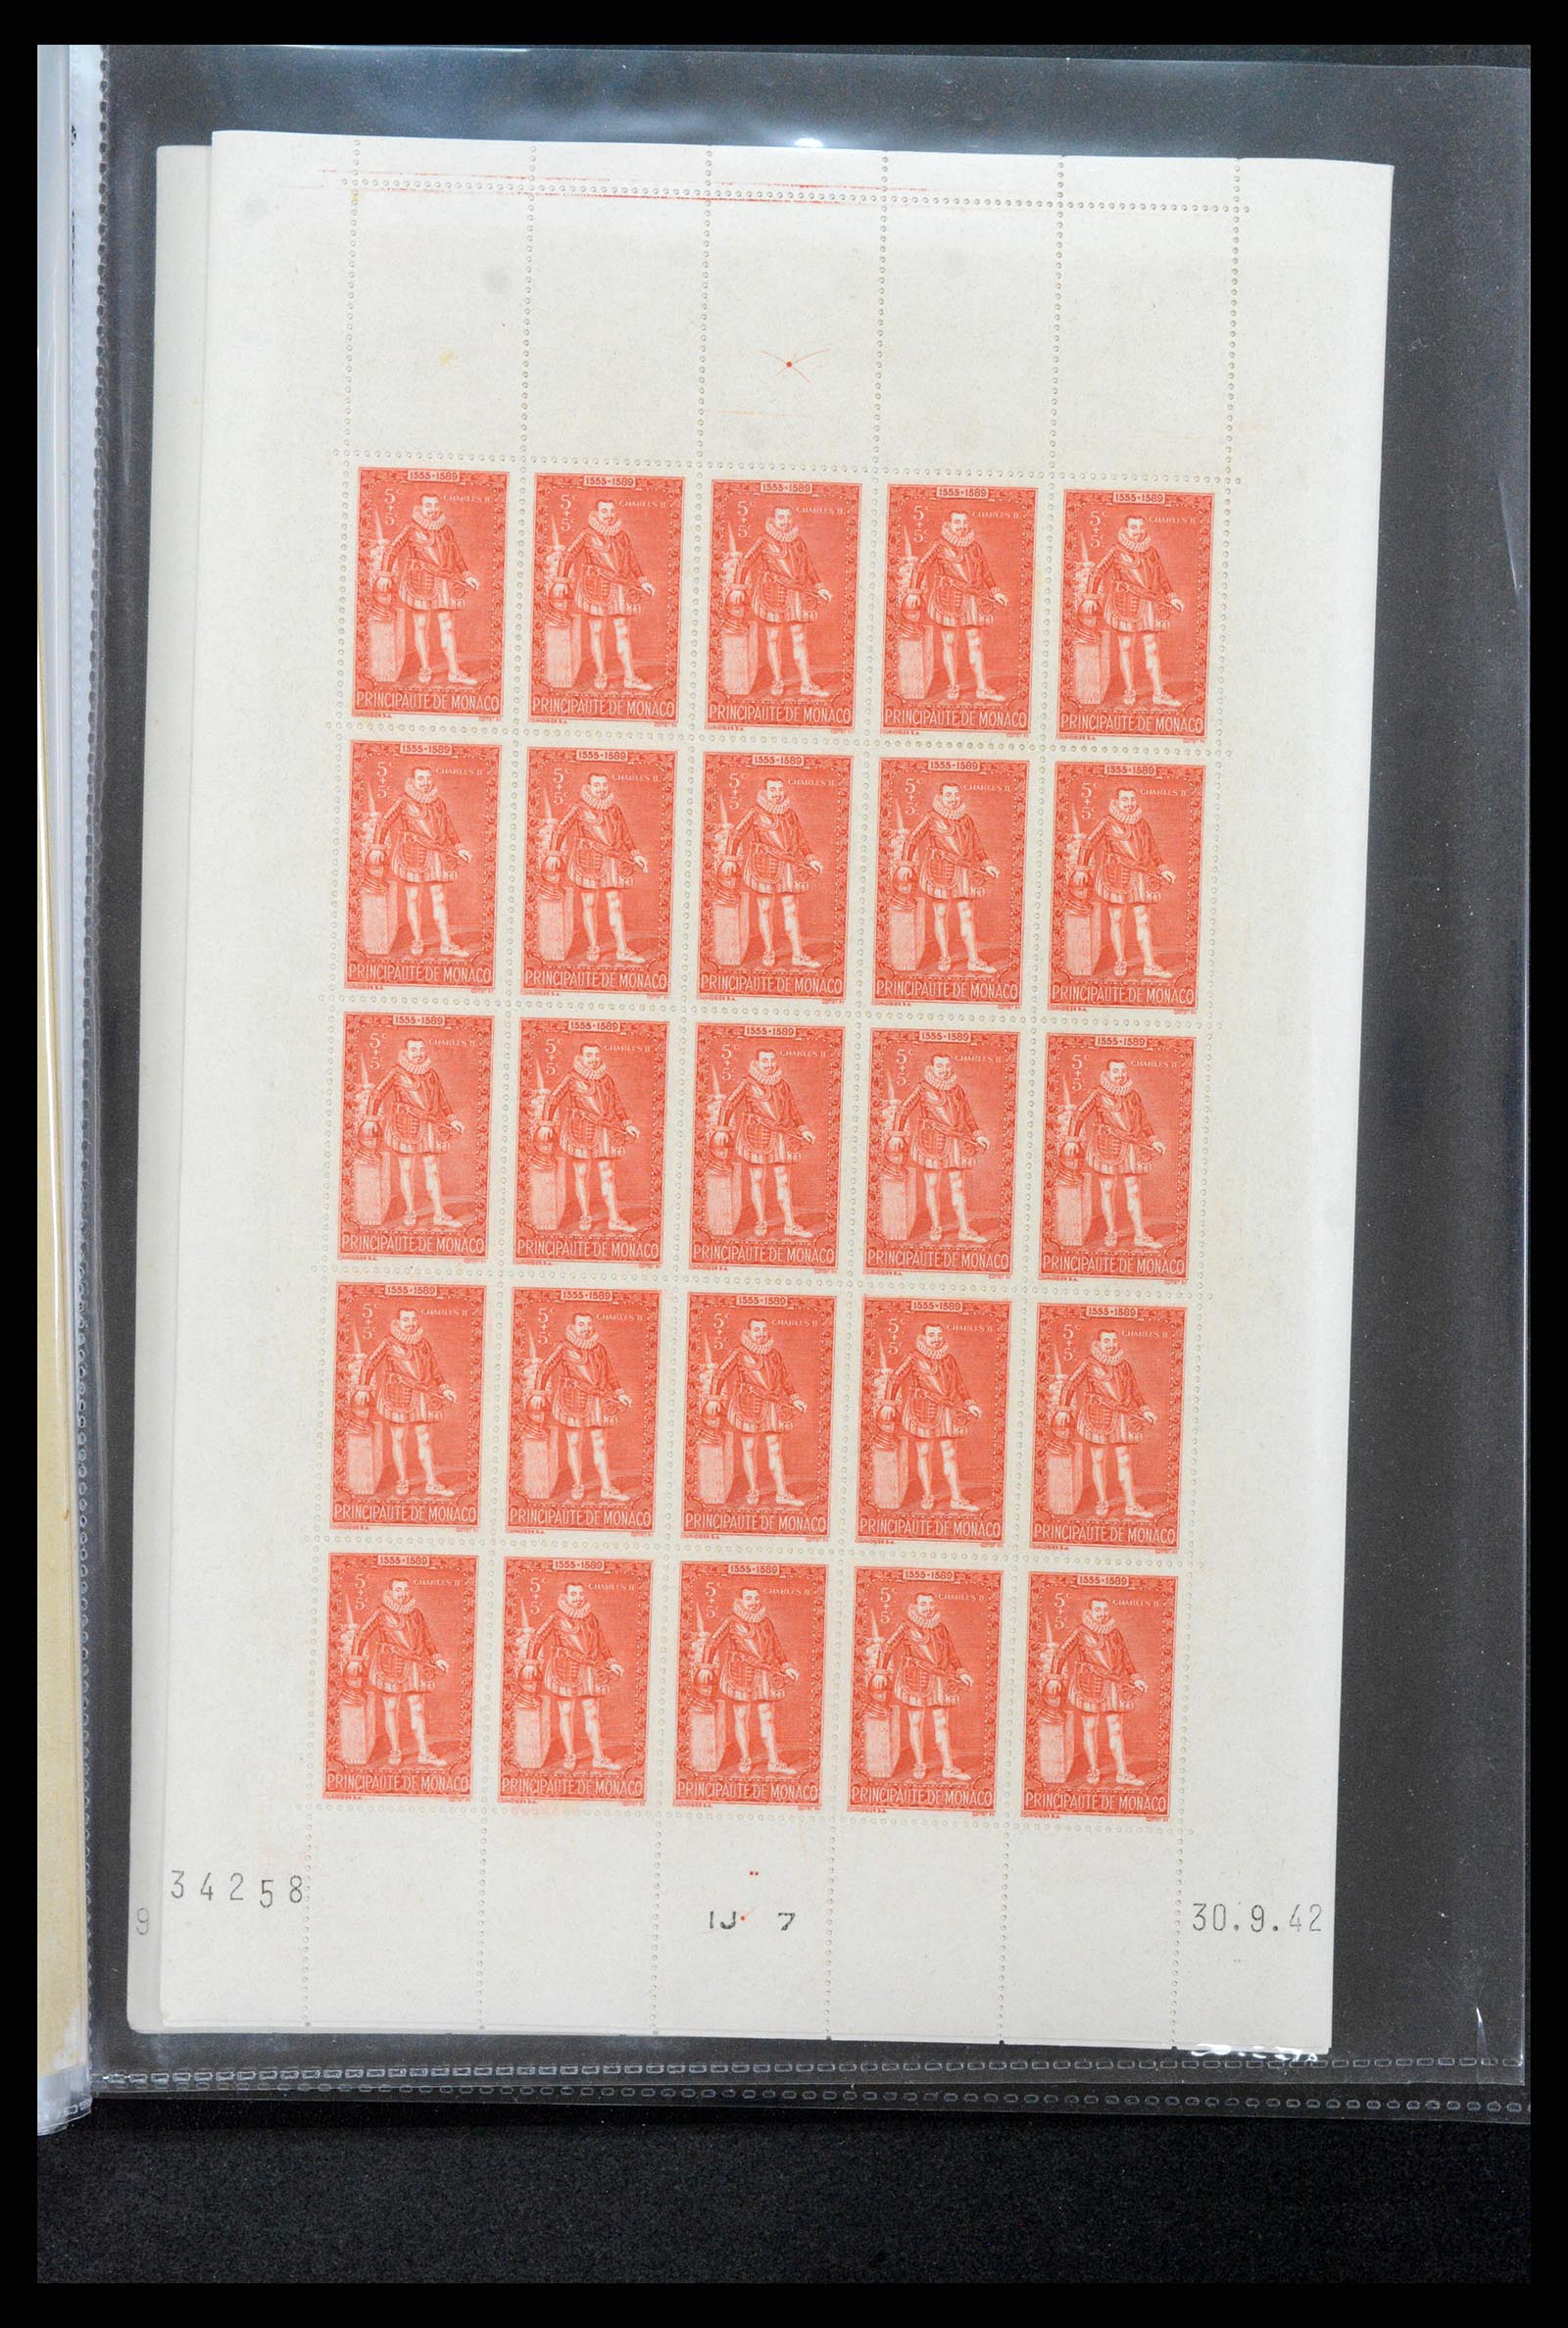 37984 031 - Stamp collection 37984 Monaco better issues 1942-1982.